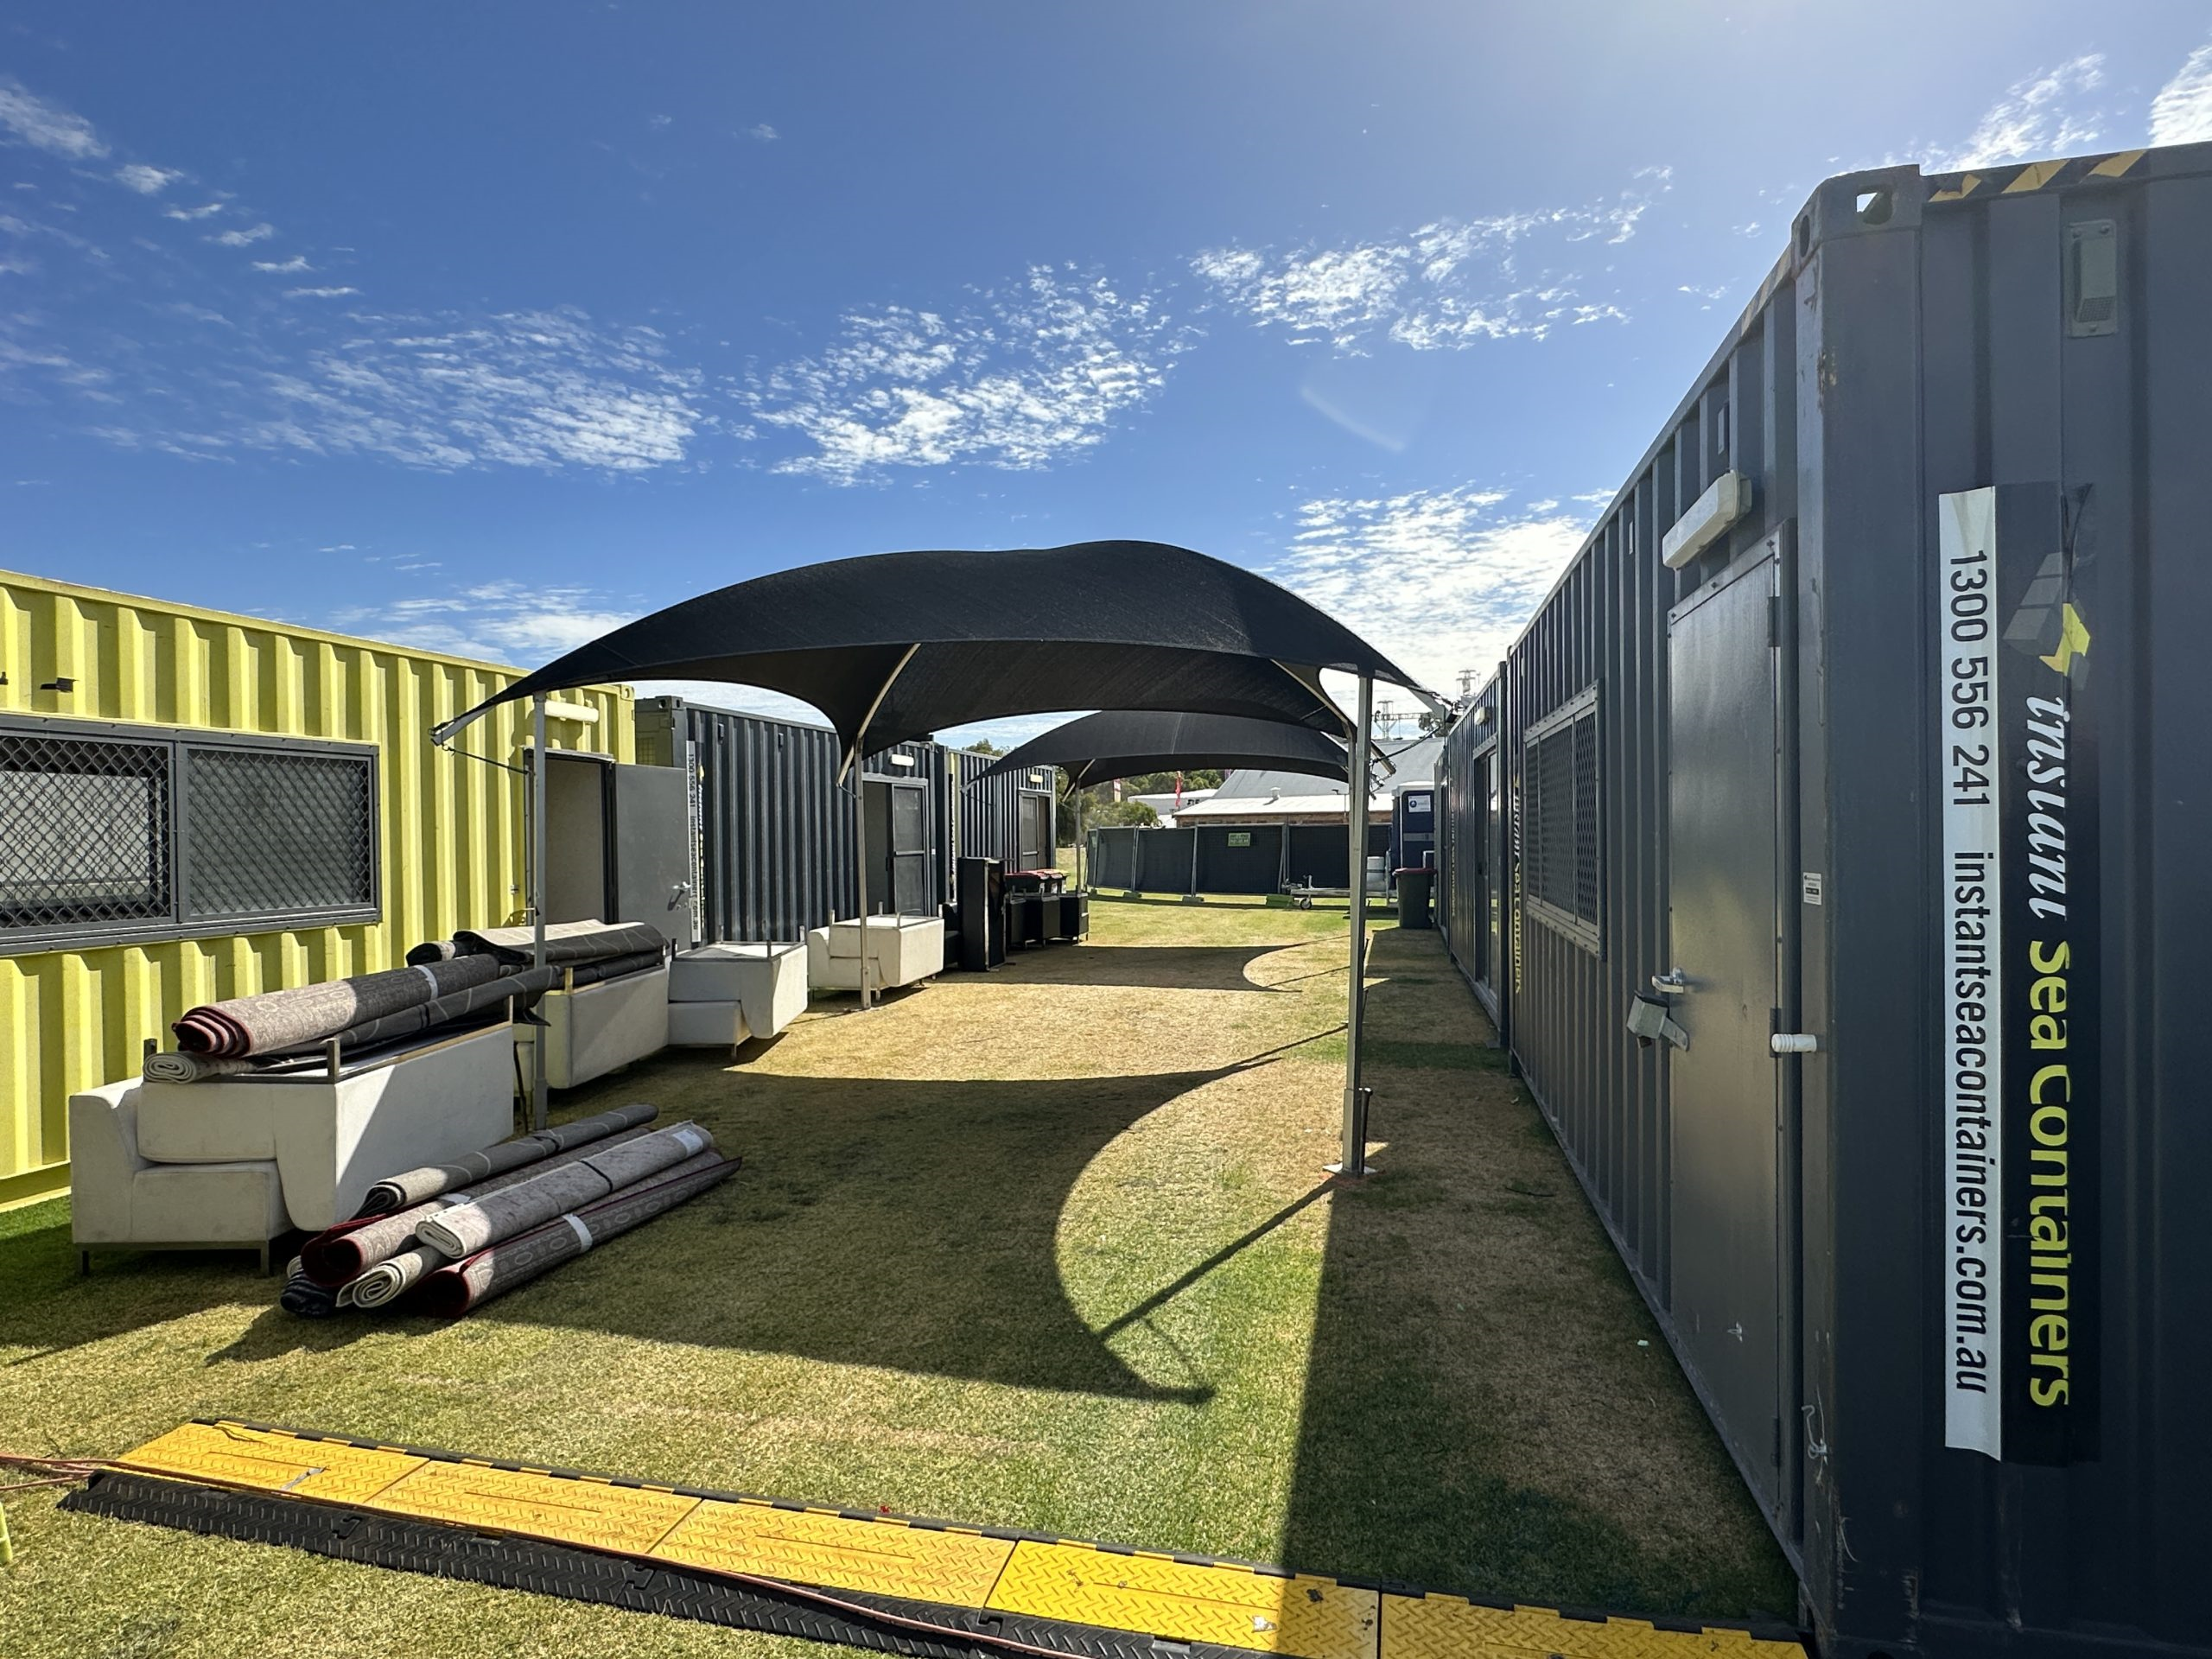 Outdoor event setup with modified shipping containers, artificial turf, and canopies, under a clear sky.